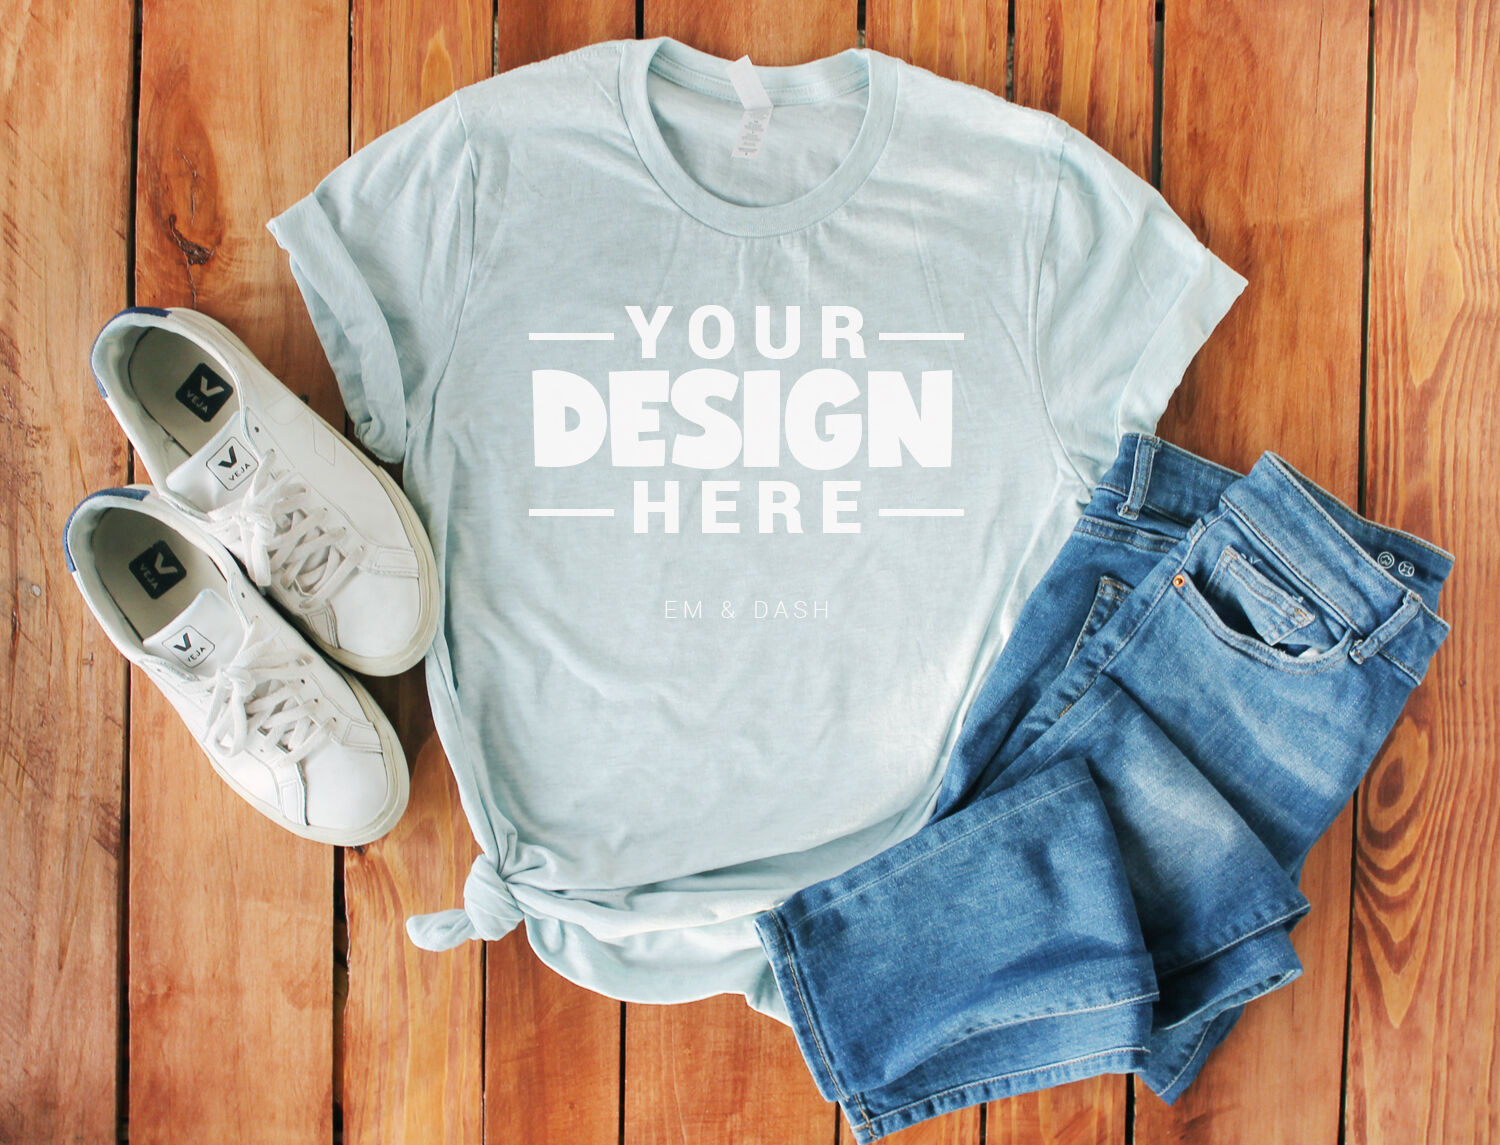 Bella Canvas 3001 Mockup Styled Flat Lay Bella Canvas Heather Prism Ice Blue Shirt Mockup Tied T Shirt Mockup Hanging T Shirt Mockup